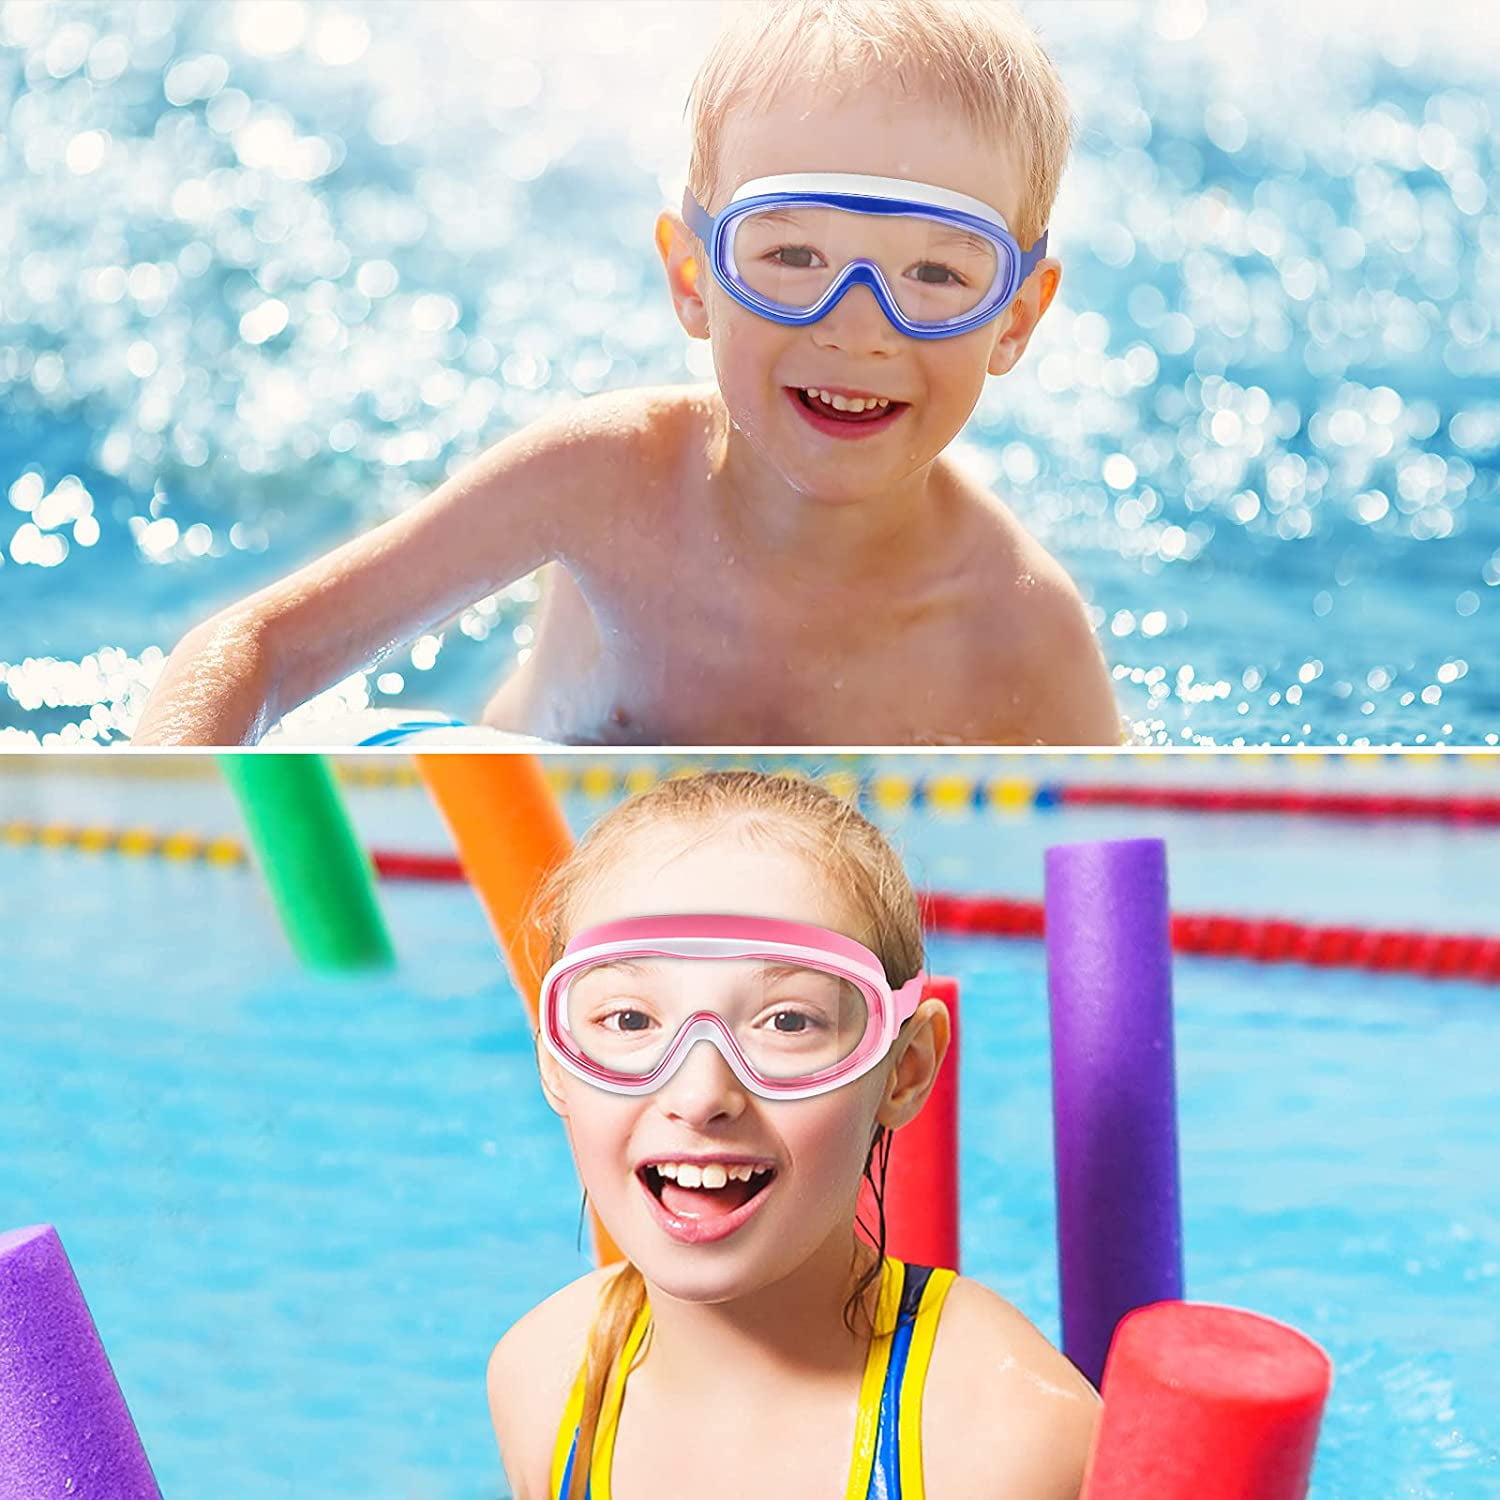 2 Packs Crystal Clear Swim Goggles for Kids Boys, COOLOO Kids Swimming Goggles 